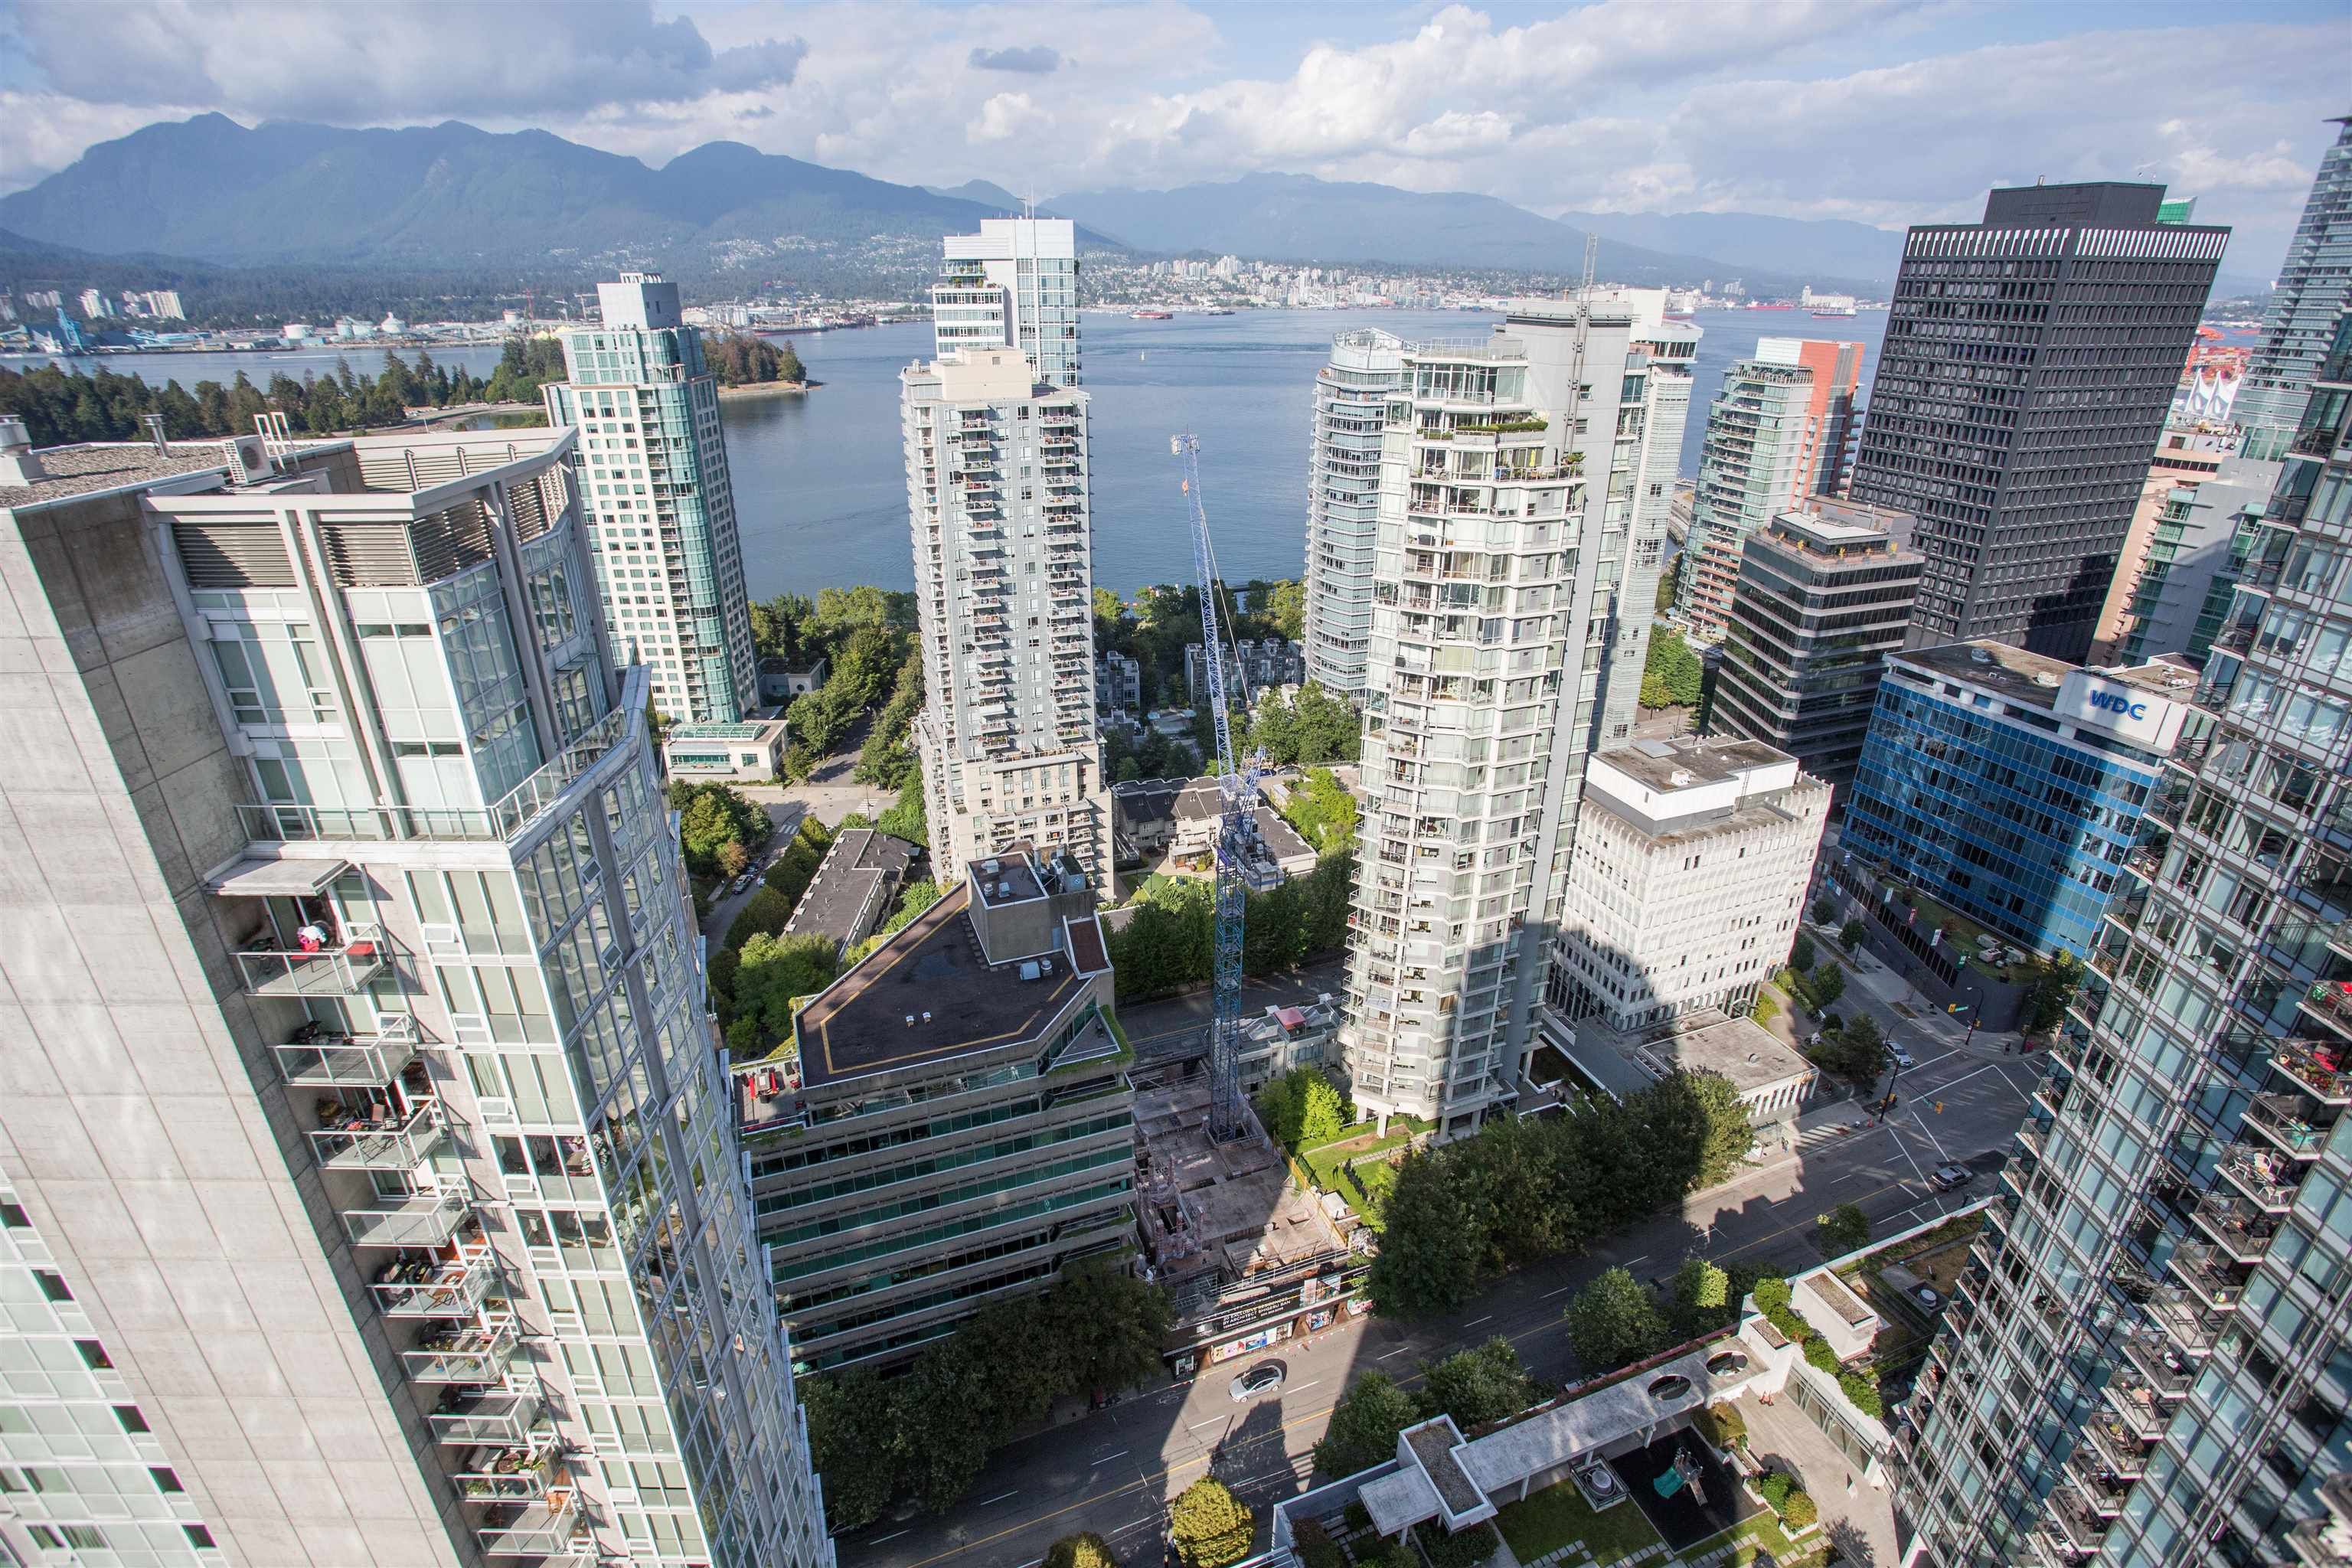 Main Photo: 3302 1238 MELVILLE STREET in Vancouver: Coal Harbour Condo for sale (Vancouver West)  : MLS®# R2615681